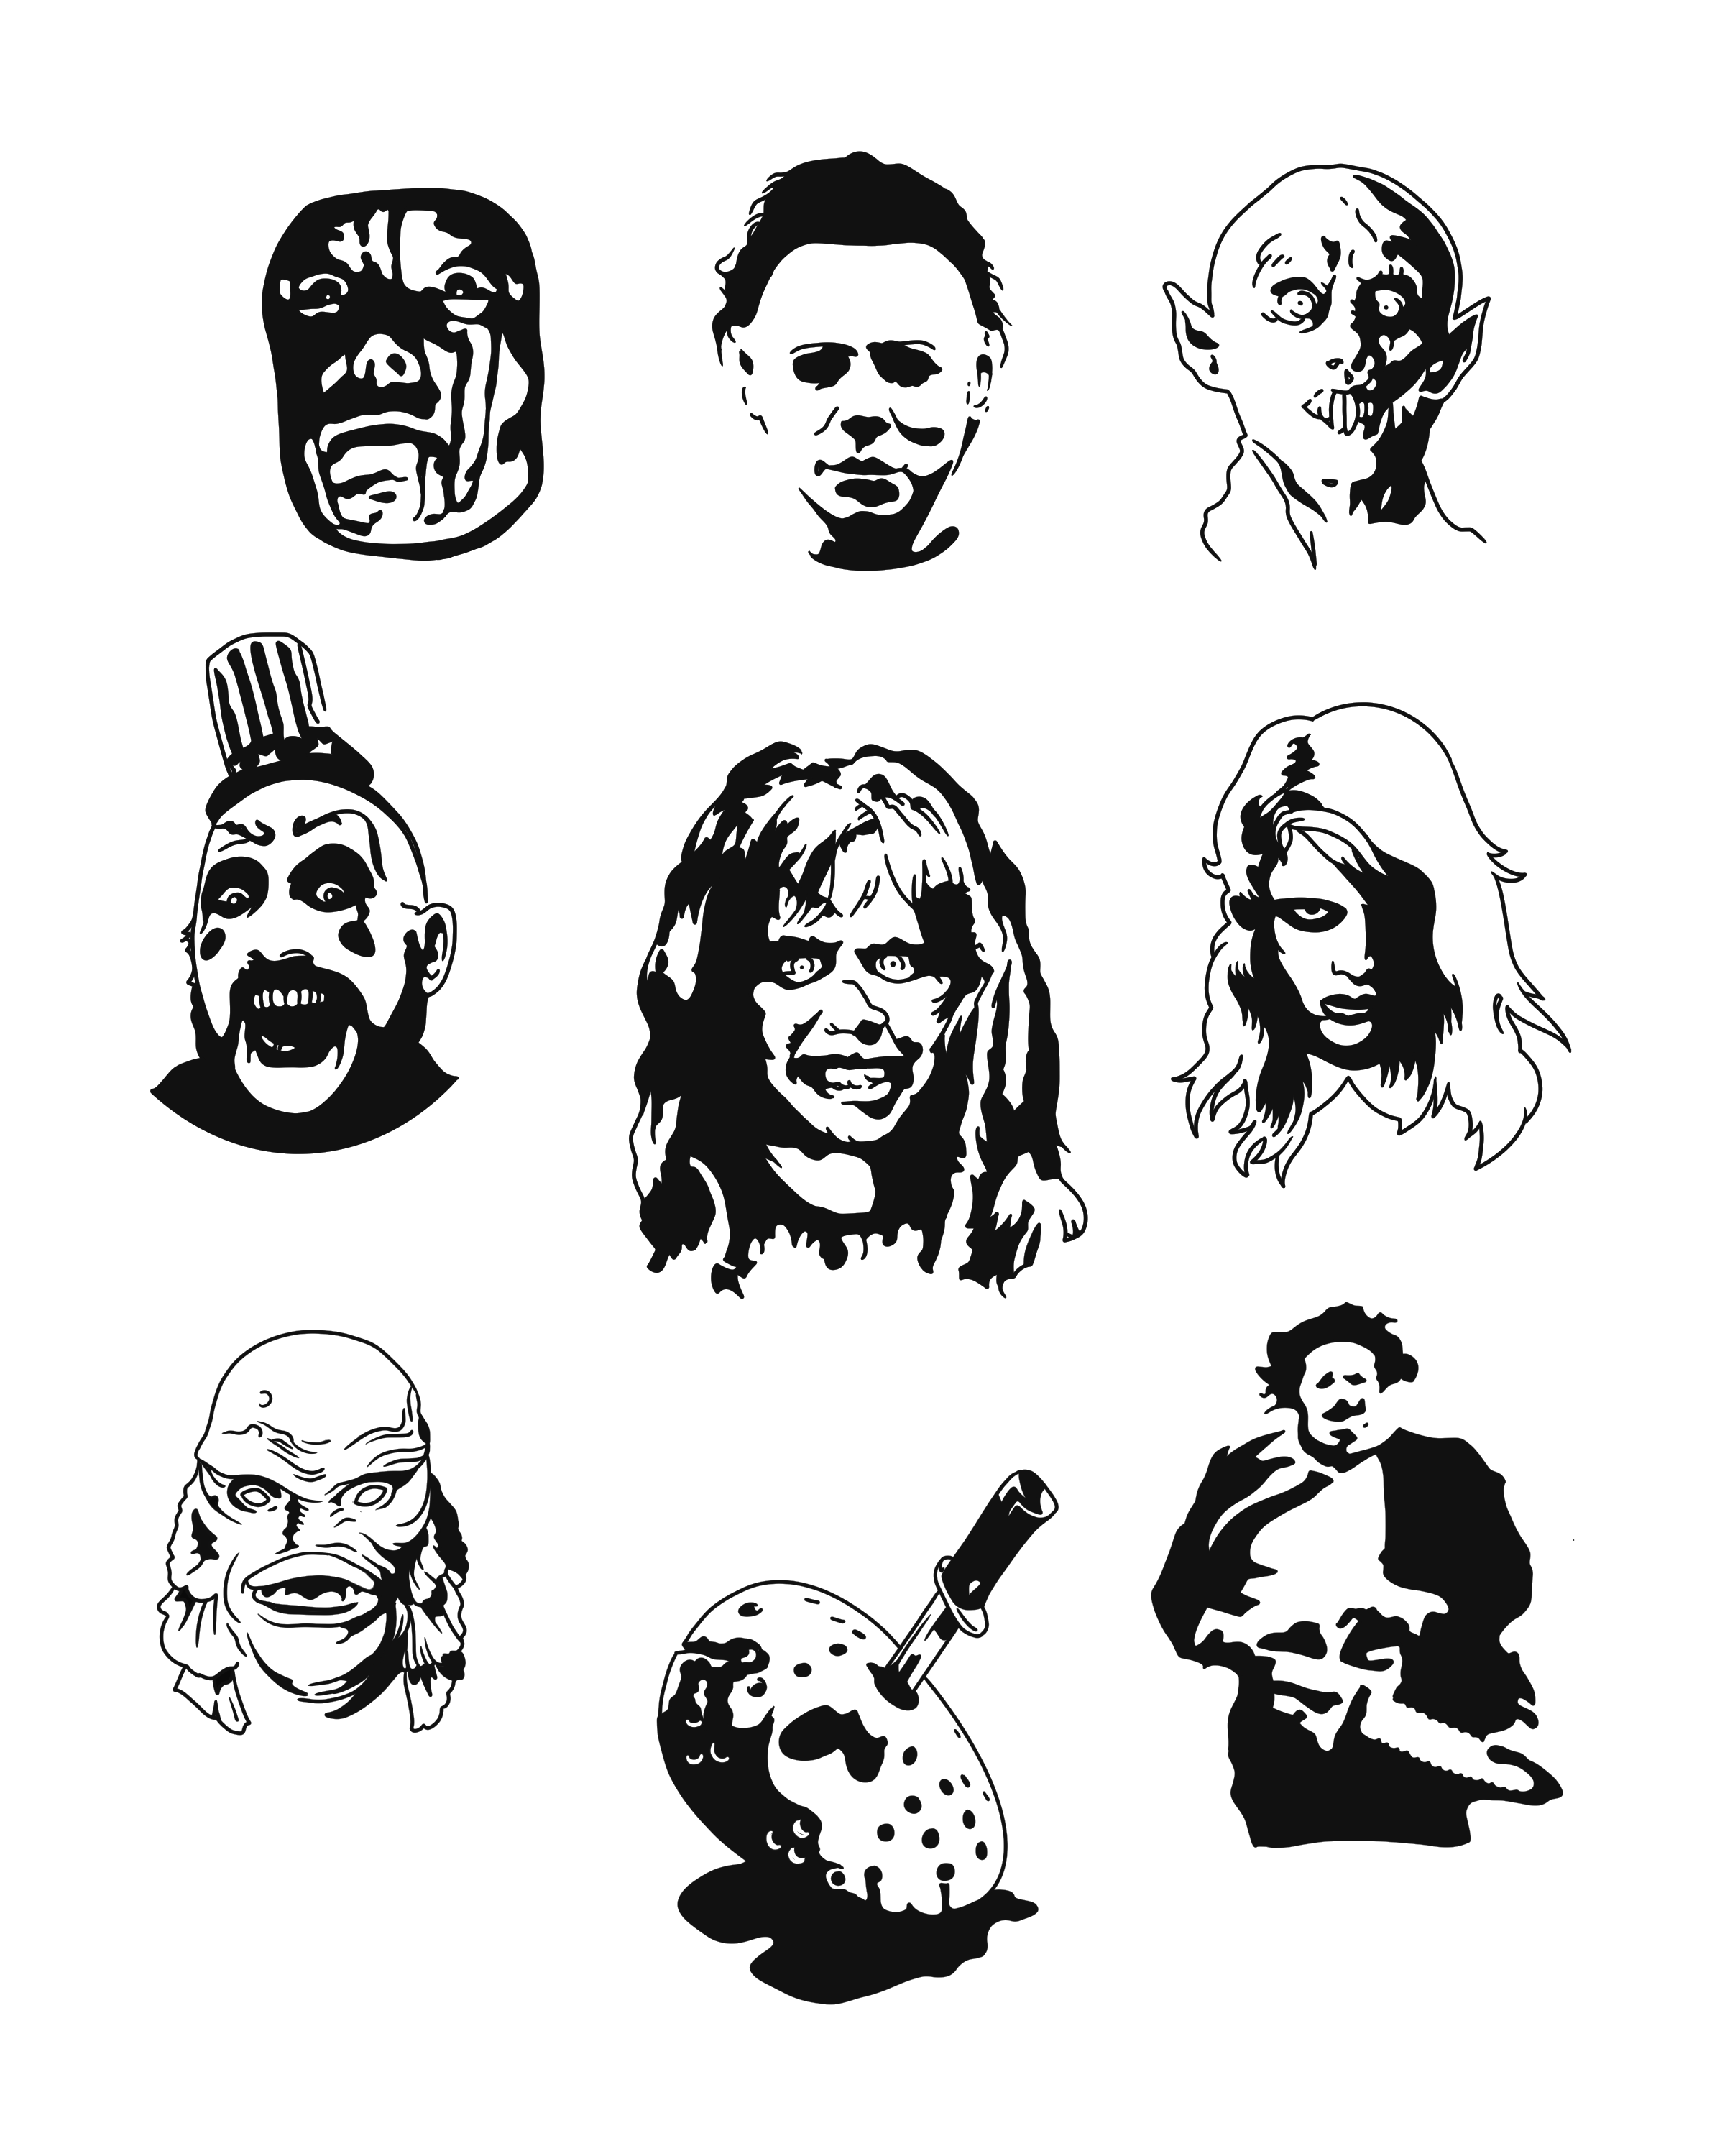 LAs Friday the 13th Tattoo Specials